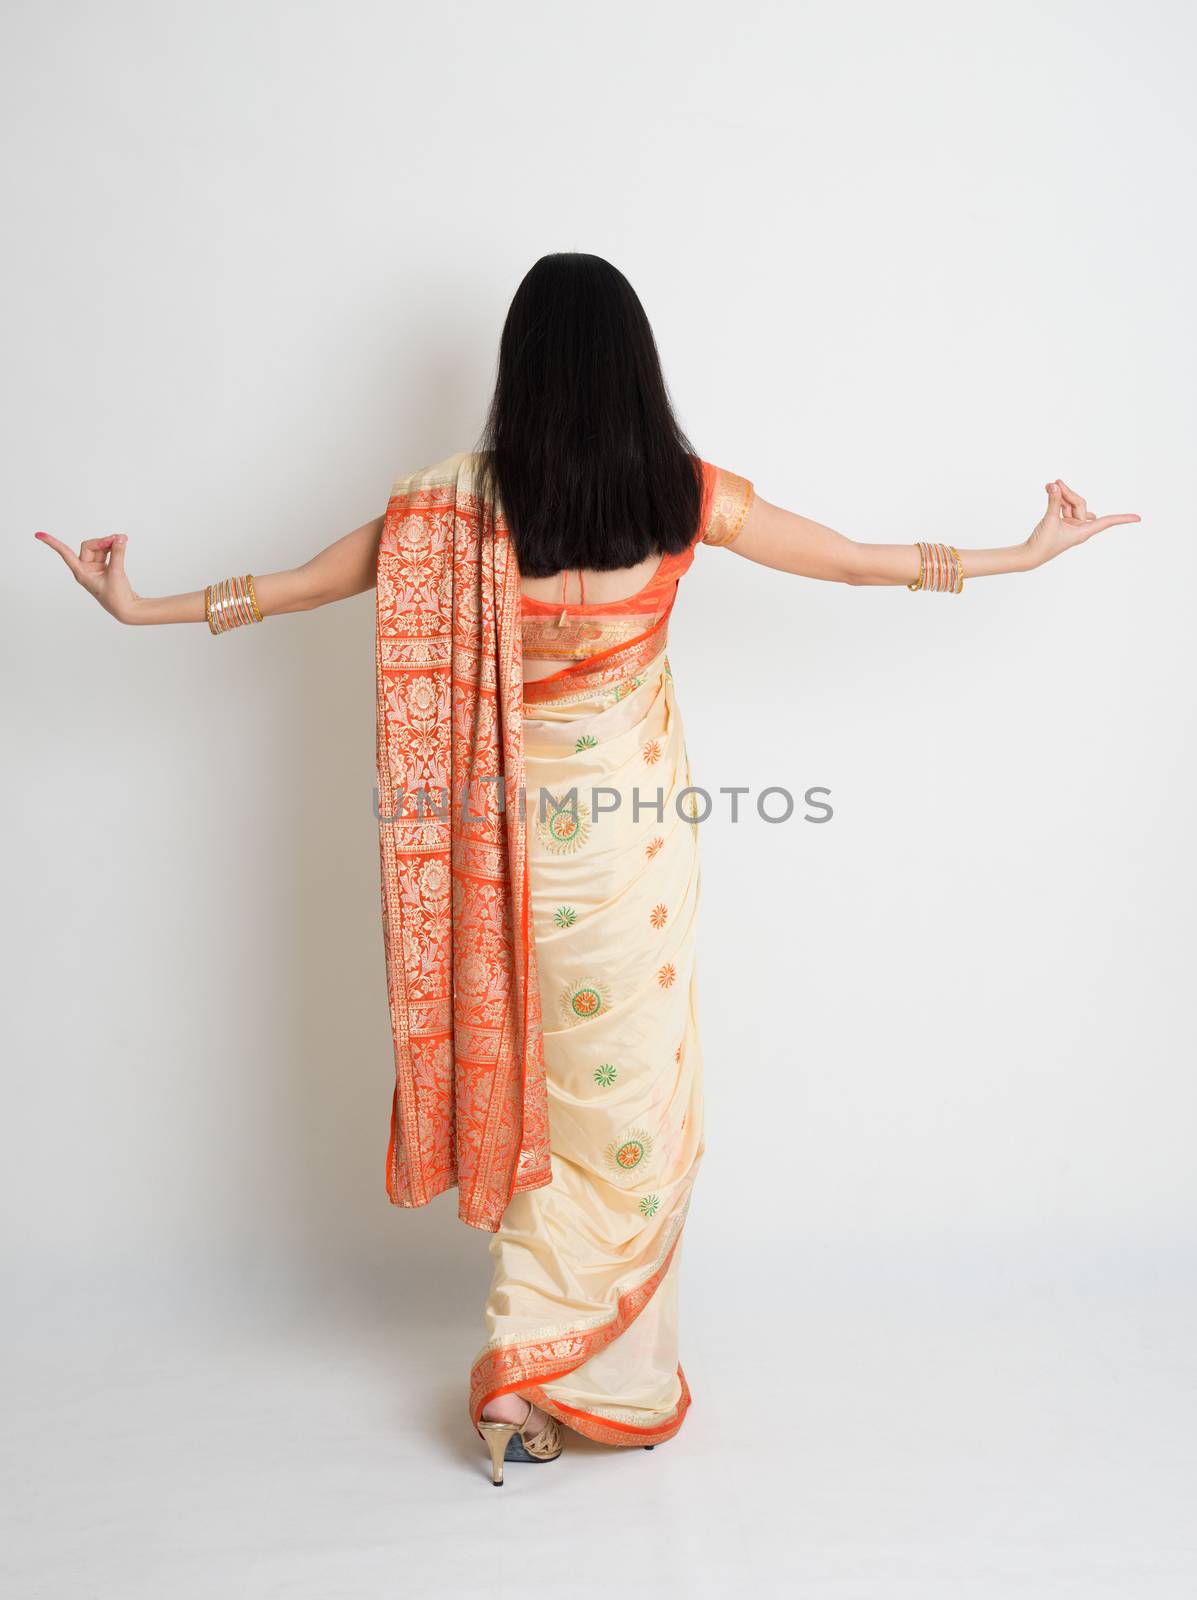 Rear view of young mixed race Indian Chinese woman in traditional sari dress dancing, full length on plain background.